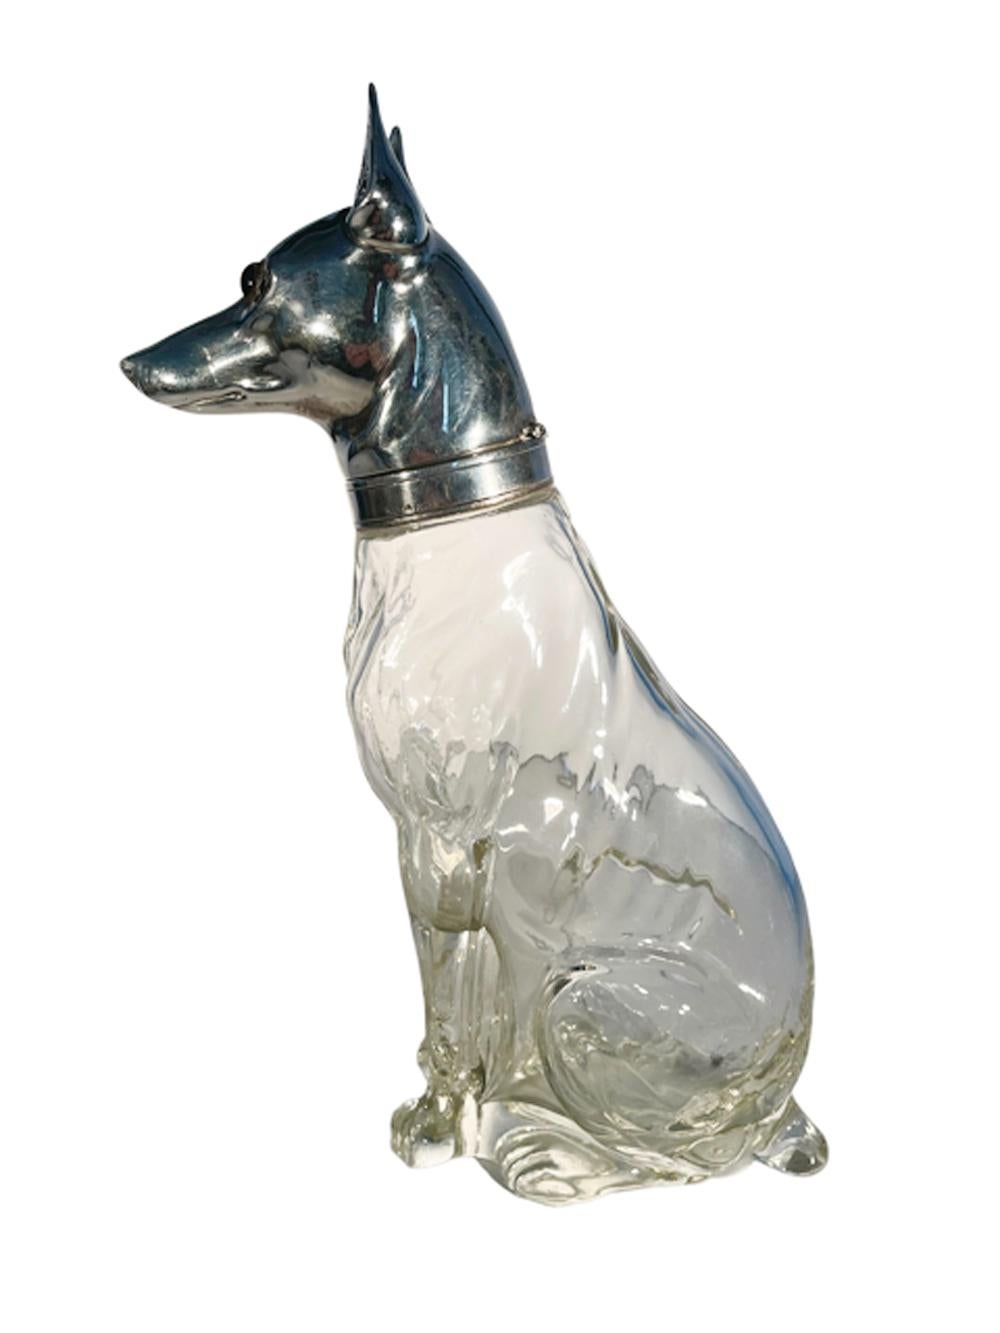 Austrian Art Deco Greyhound or Whippet Decanter Glass w/Silver Plate Head with Glass Eyes For Sale